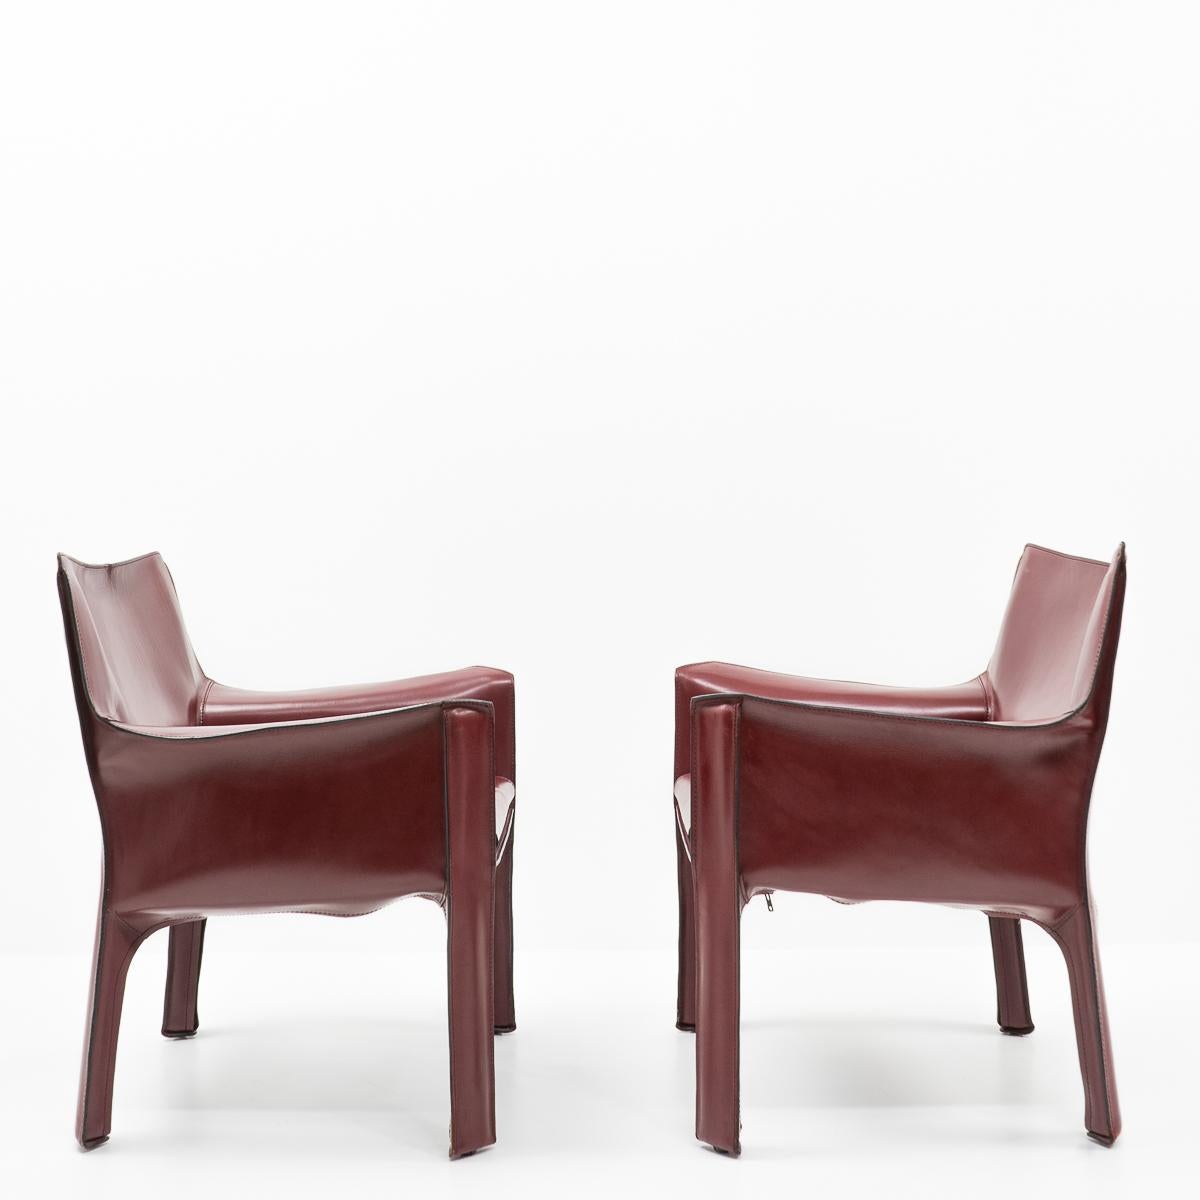 Late 20th Century Italian Design Cab 414 Armchairs by Mario Bellini for Cassina, Set of 2